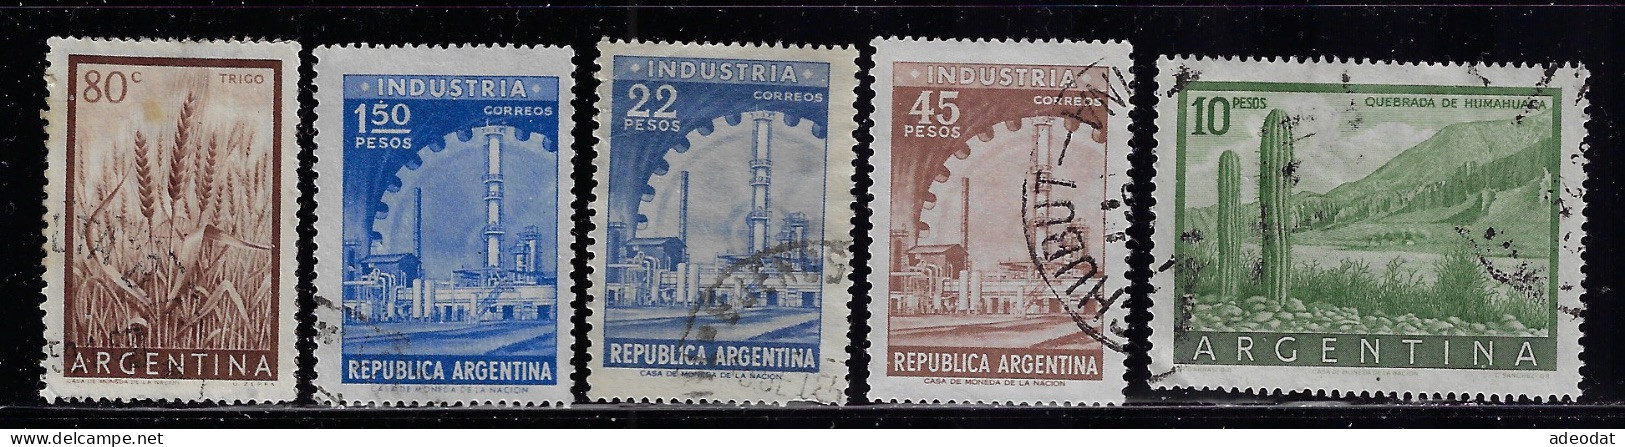 ARGENTINA  1954  SCOTT #634,636,640,824,.. USED - Used Stamps